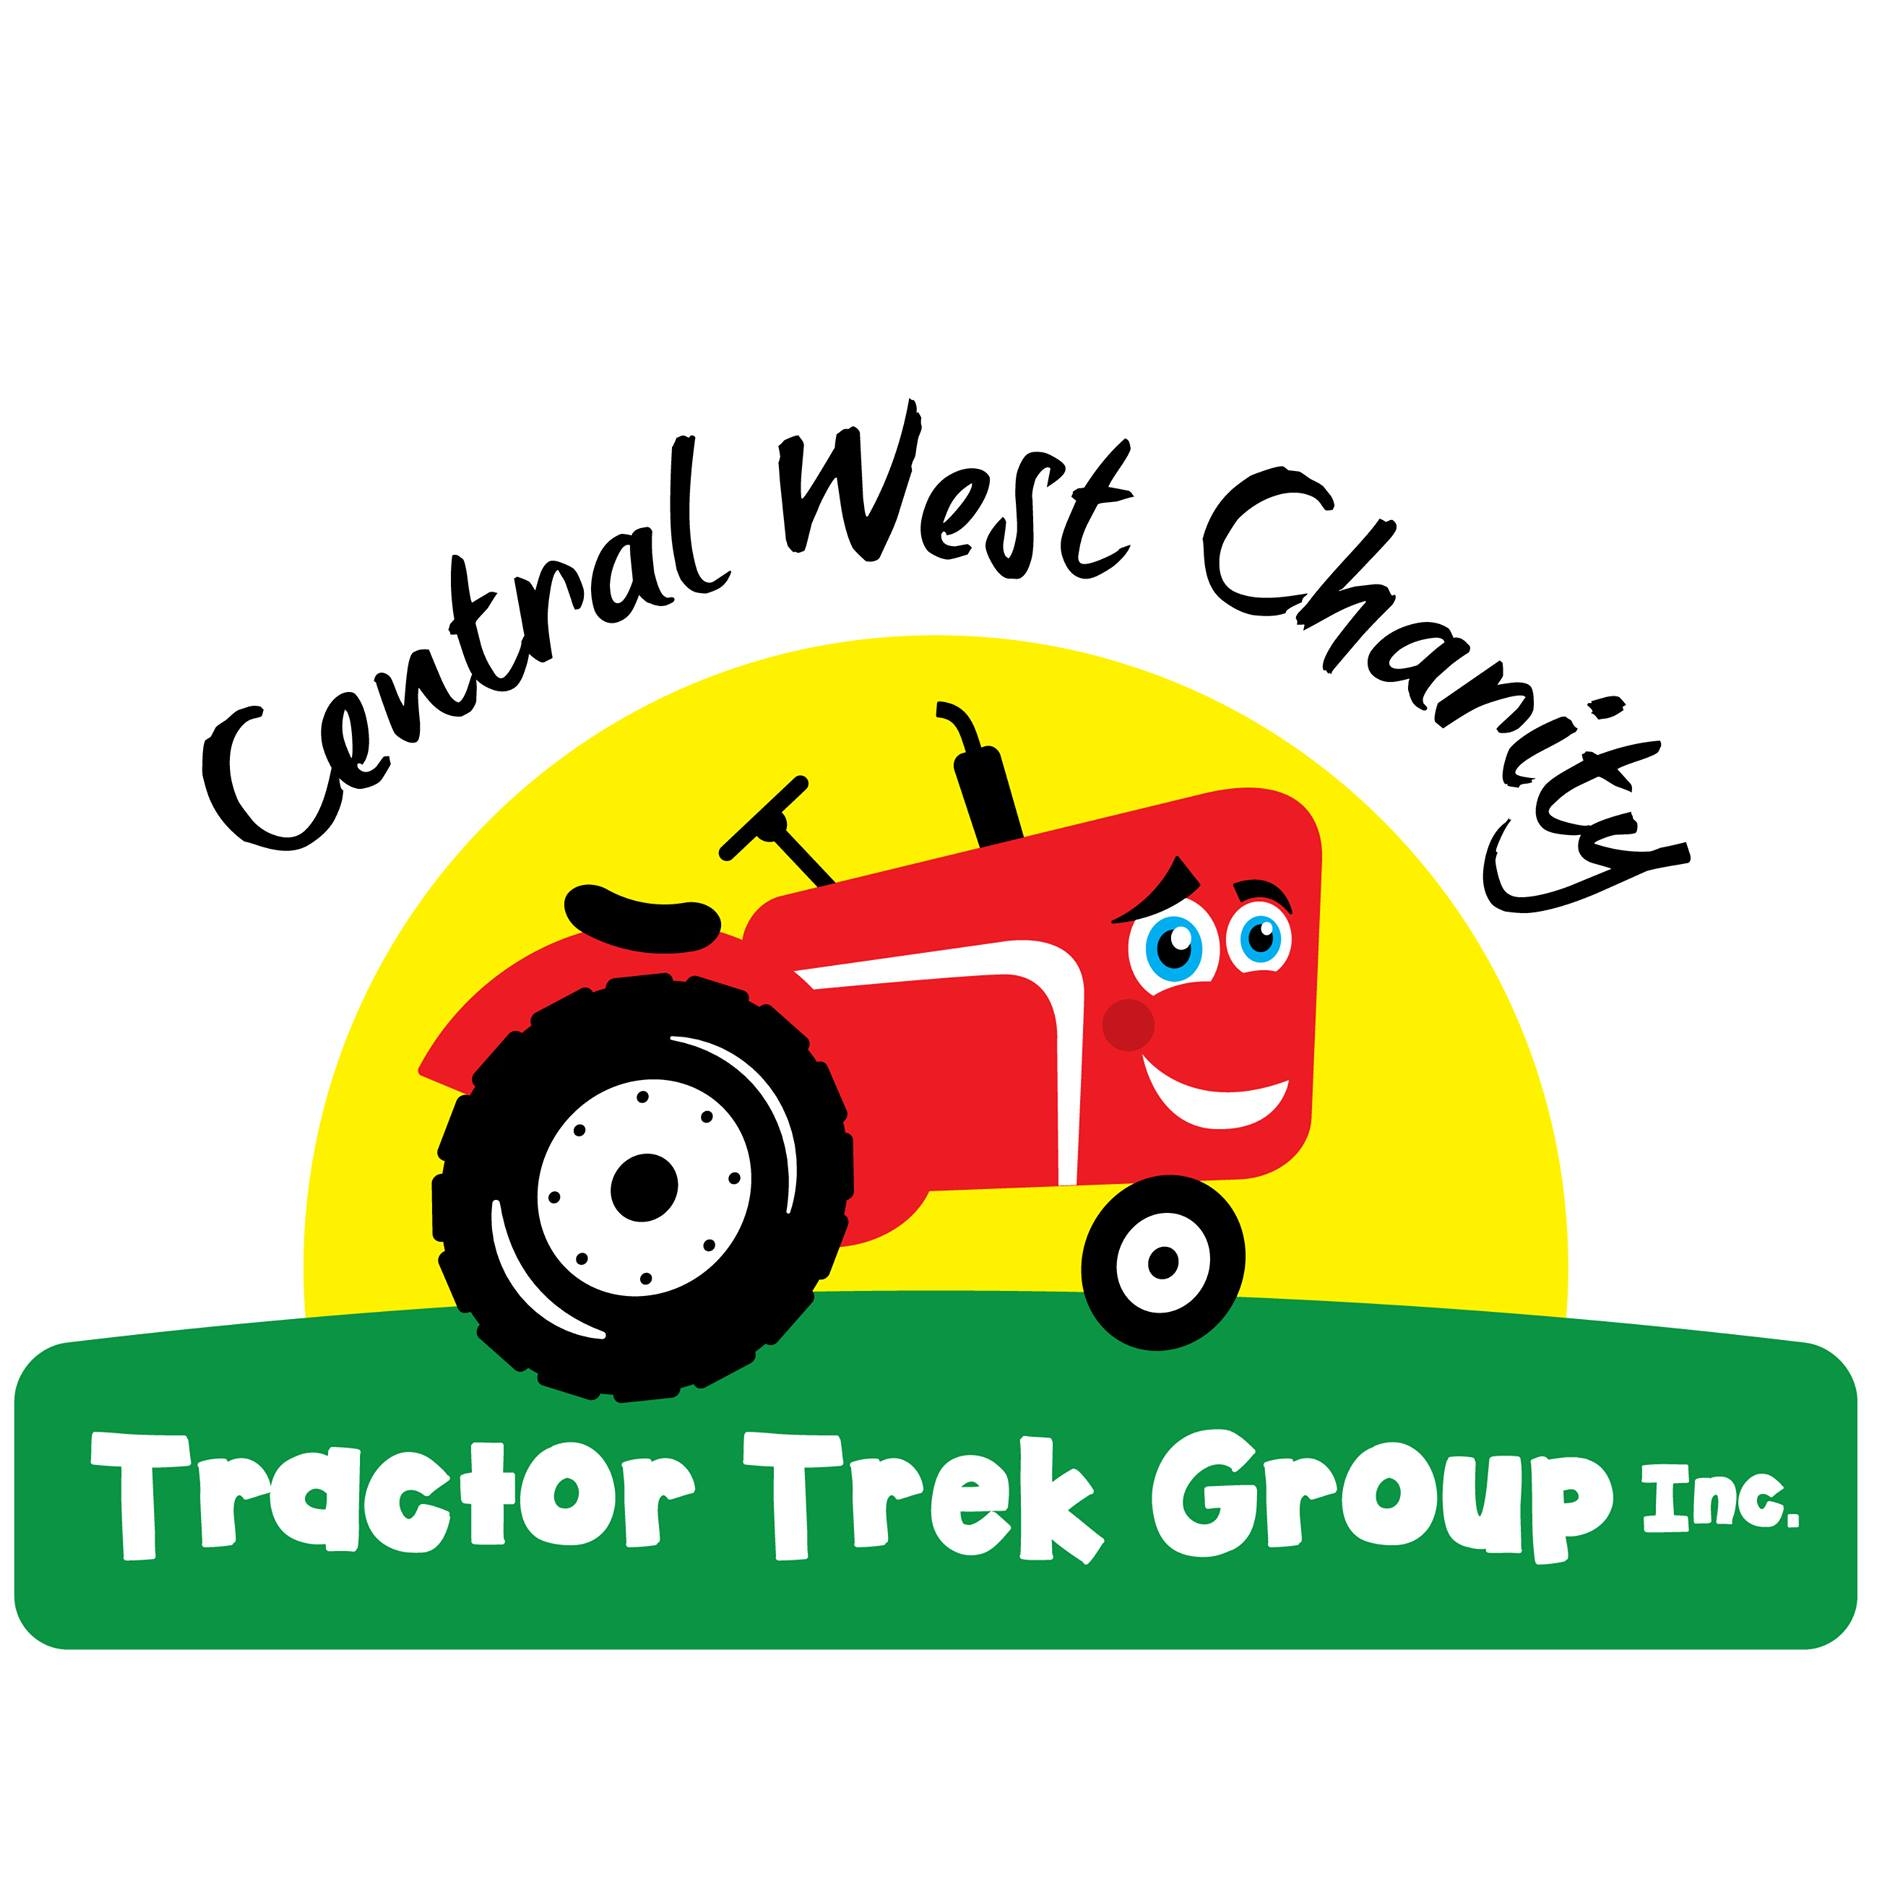 Logo of Central West Charity Tractor Trek Group Inc., featuring a red cartoon tractor with a smiling face in front of a yellow sun and green ground.